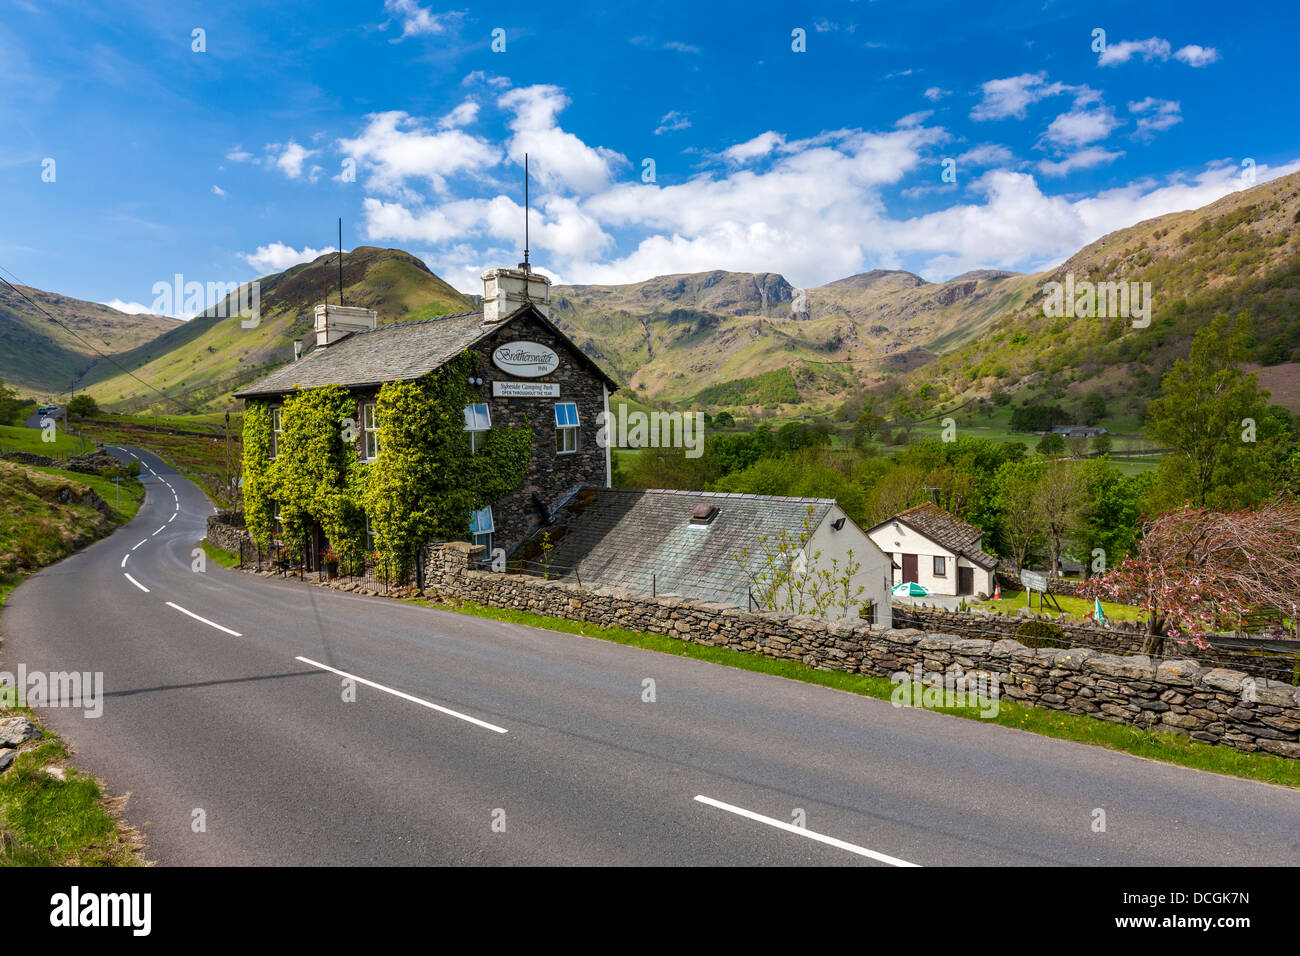 Brotherswater Inn, Dovedale valley, Parc National de Lake District, Cumbria, Angleterre, Royaume-Uni, Europe. Banque D'Images